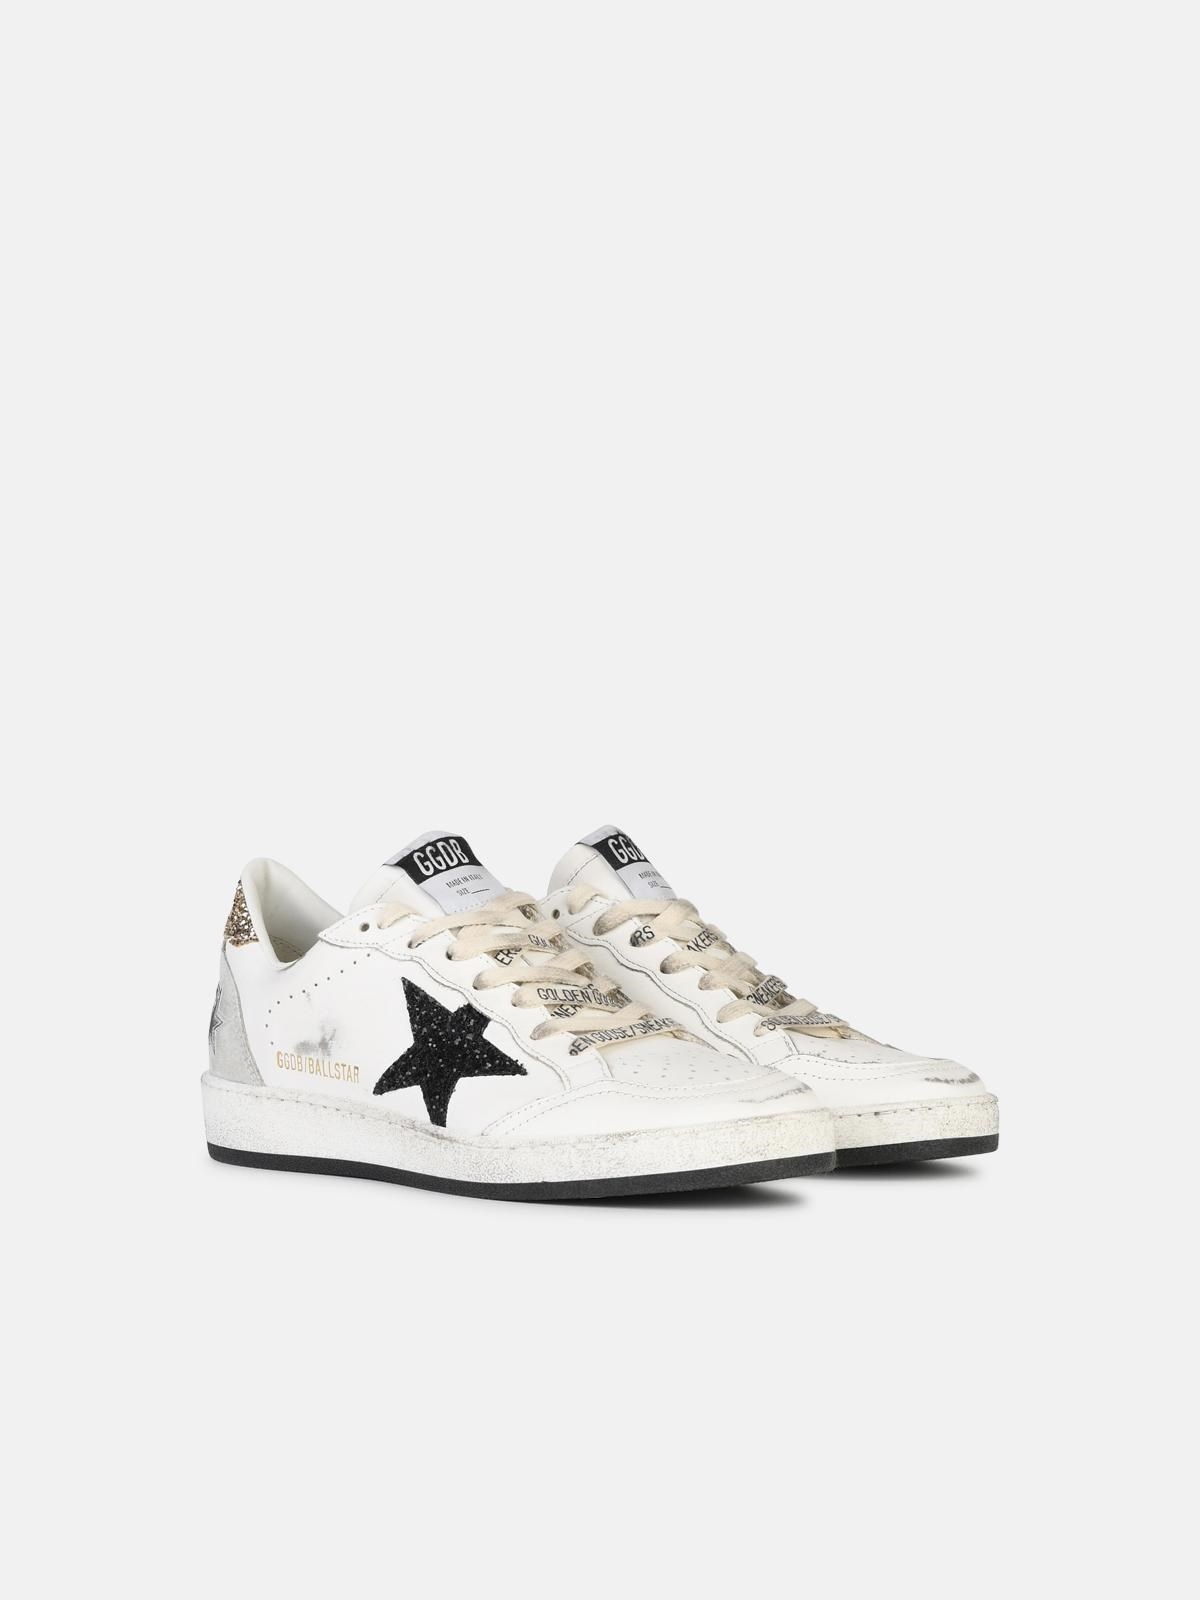 'BALL STAR' WHITE LEATHER SNEAKERS - 2